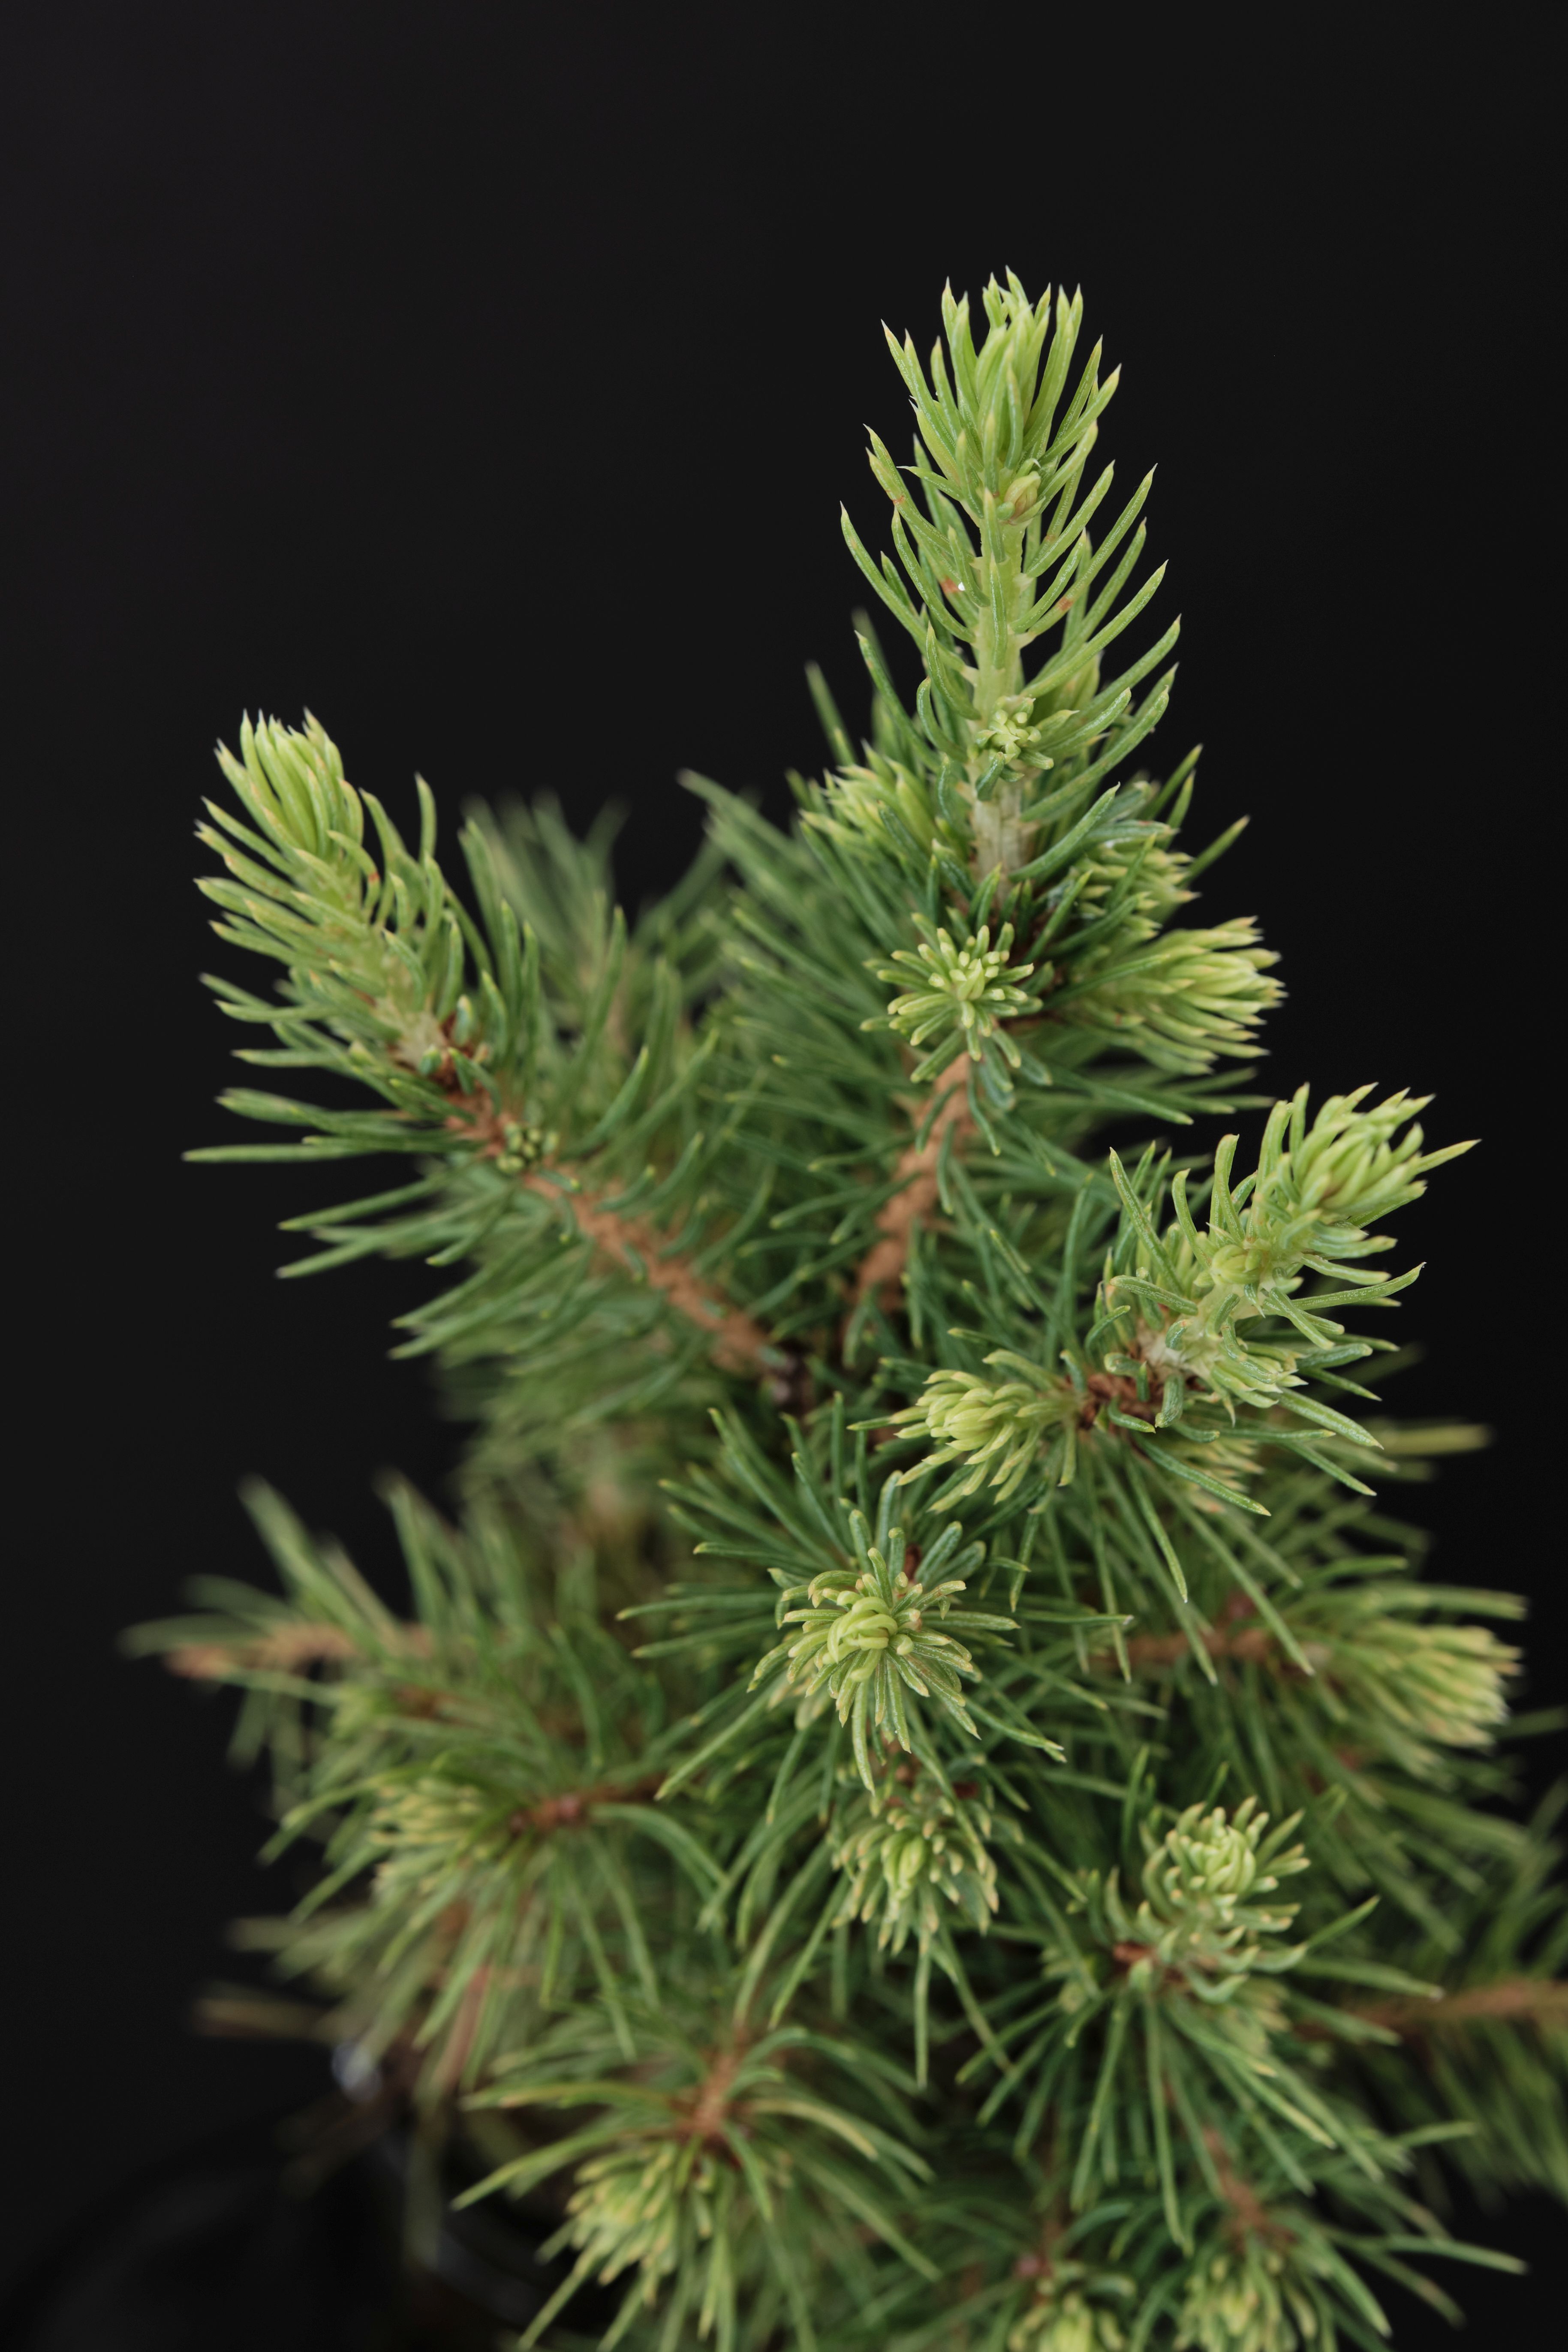 images/plants/picea/pic-spruce-it-up/pic-spruce-it-up-0009.jpg